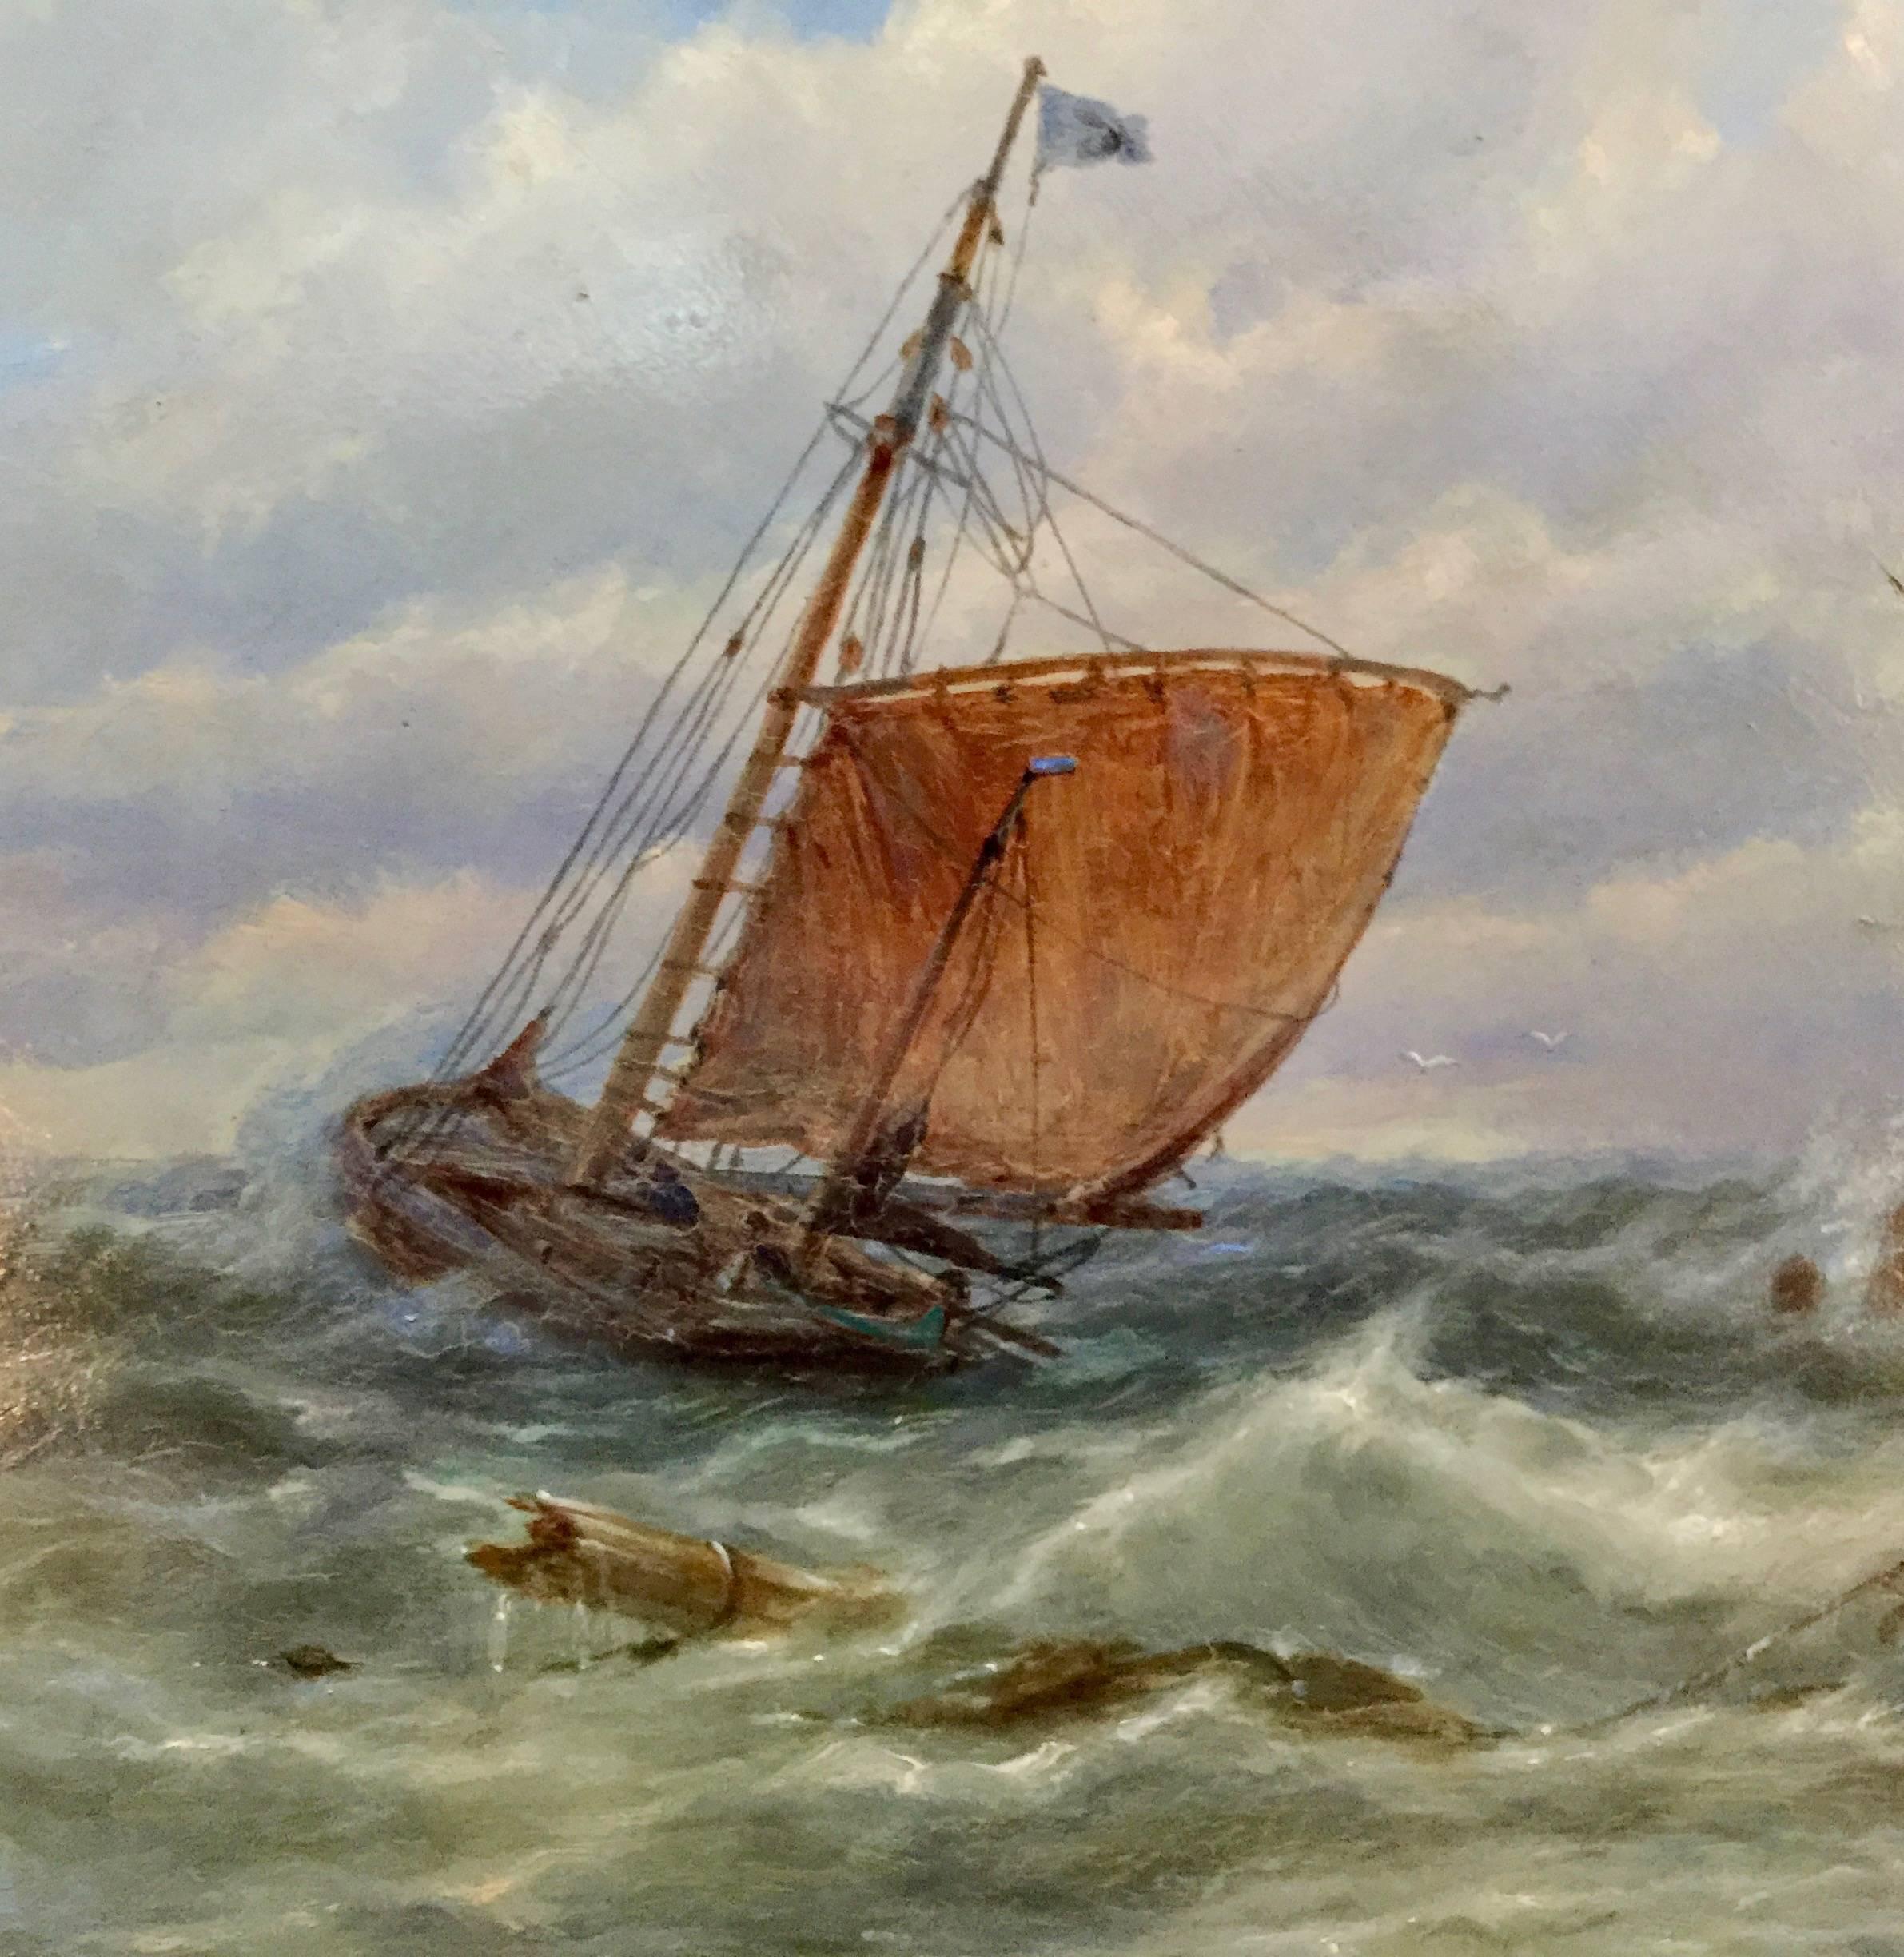 Shipping off the Dutch Coastline in Rough Seas - Painting by Dommersen, Pieter Cornelis